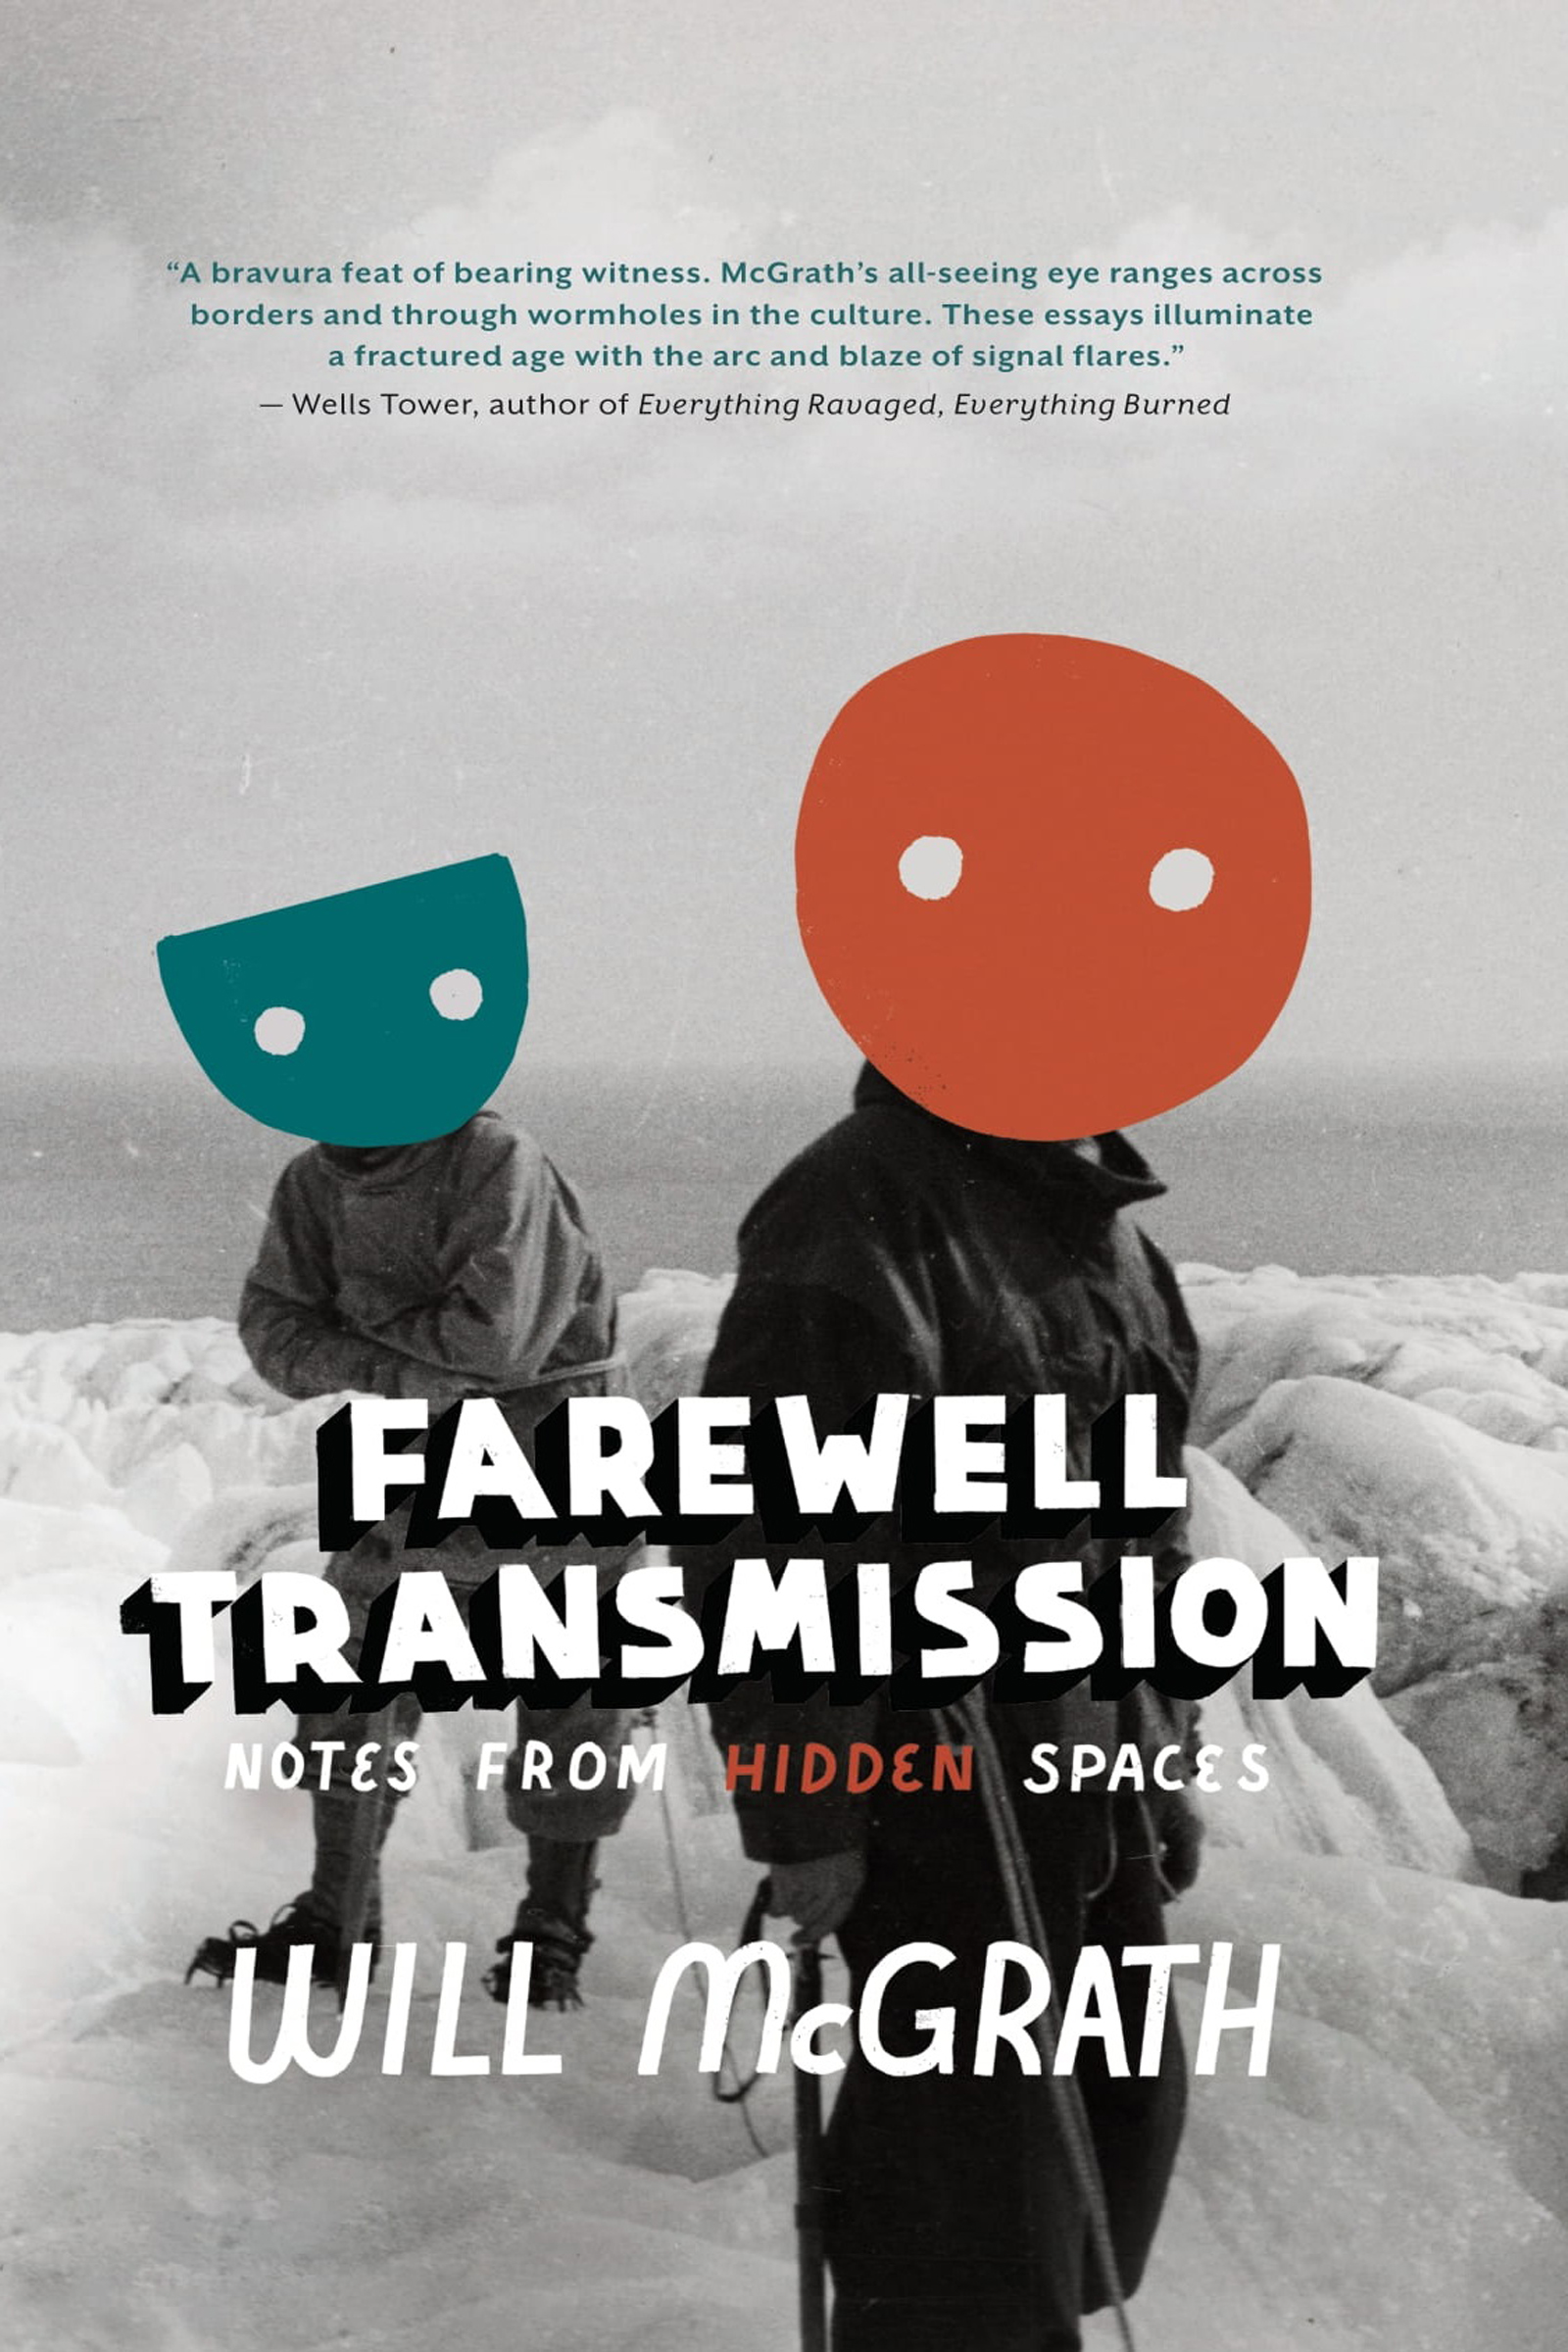 Farewell Transmission by Will McGrath